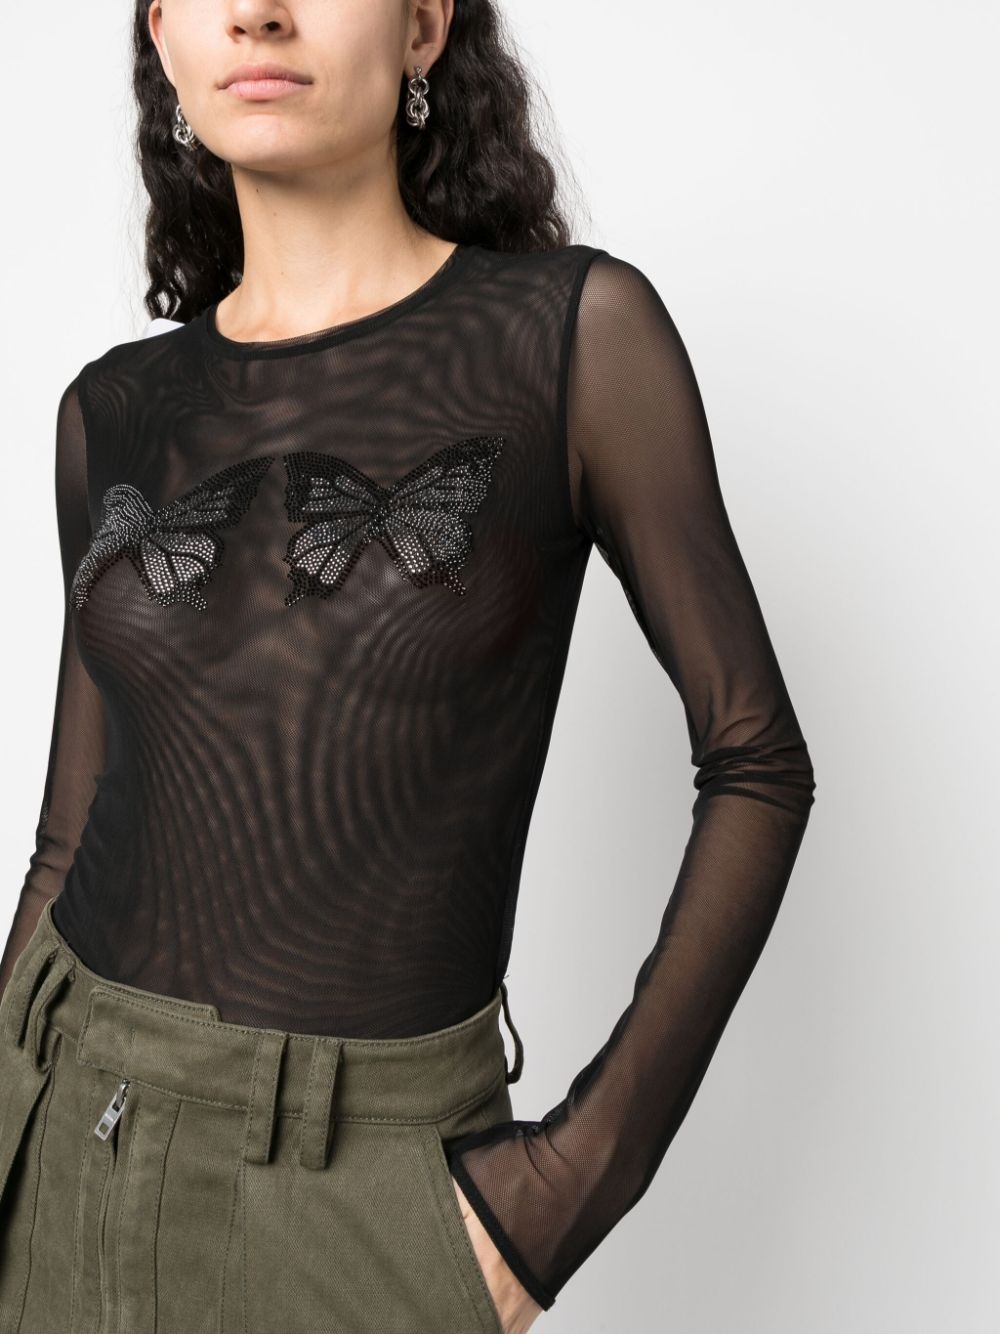 butterfly-embellished mesh top - 5